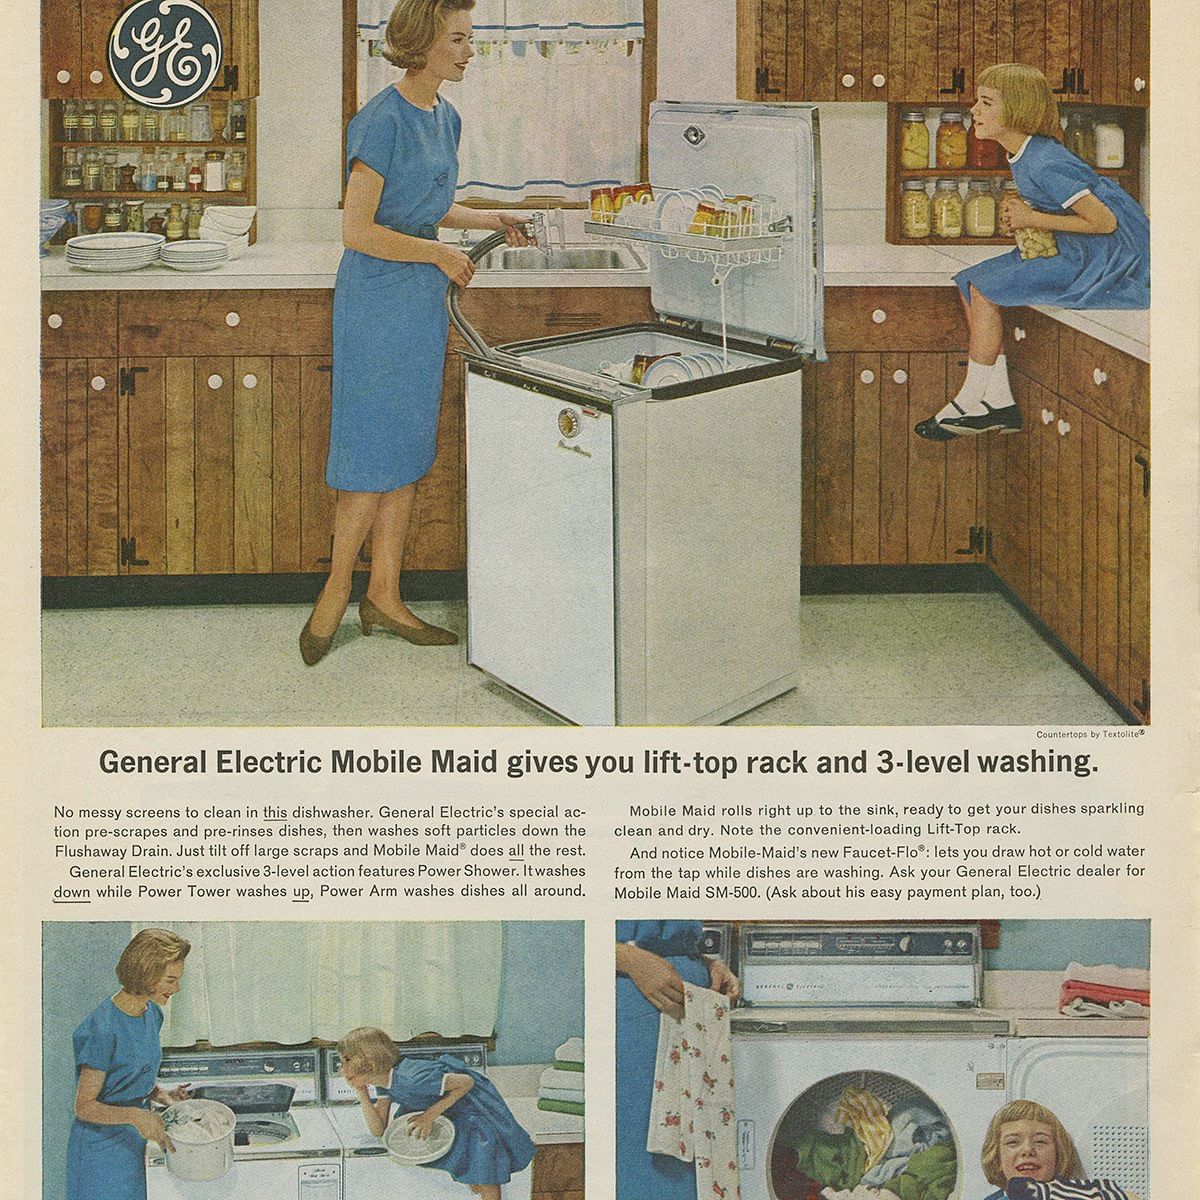 1963 Ad For General Electric Mobile Maid Dishwasher